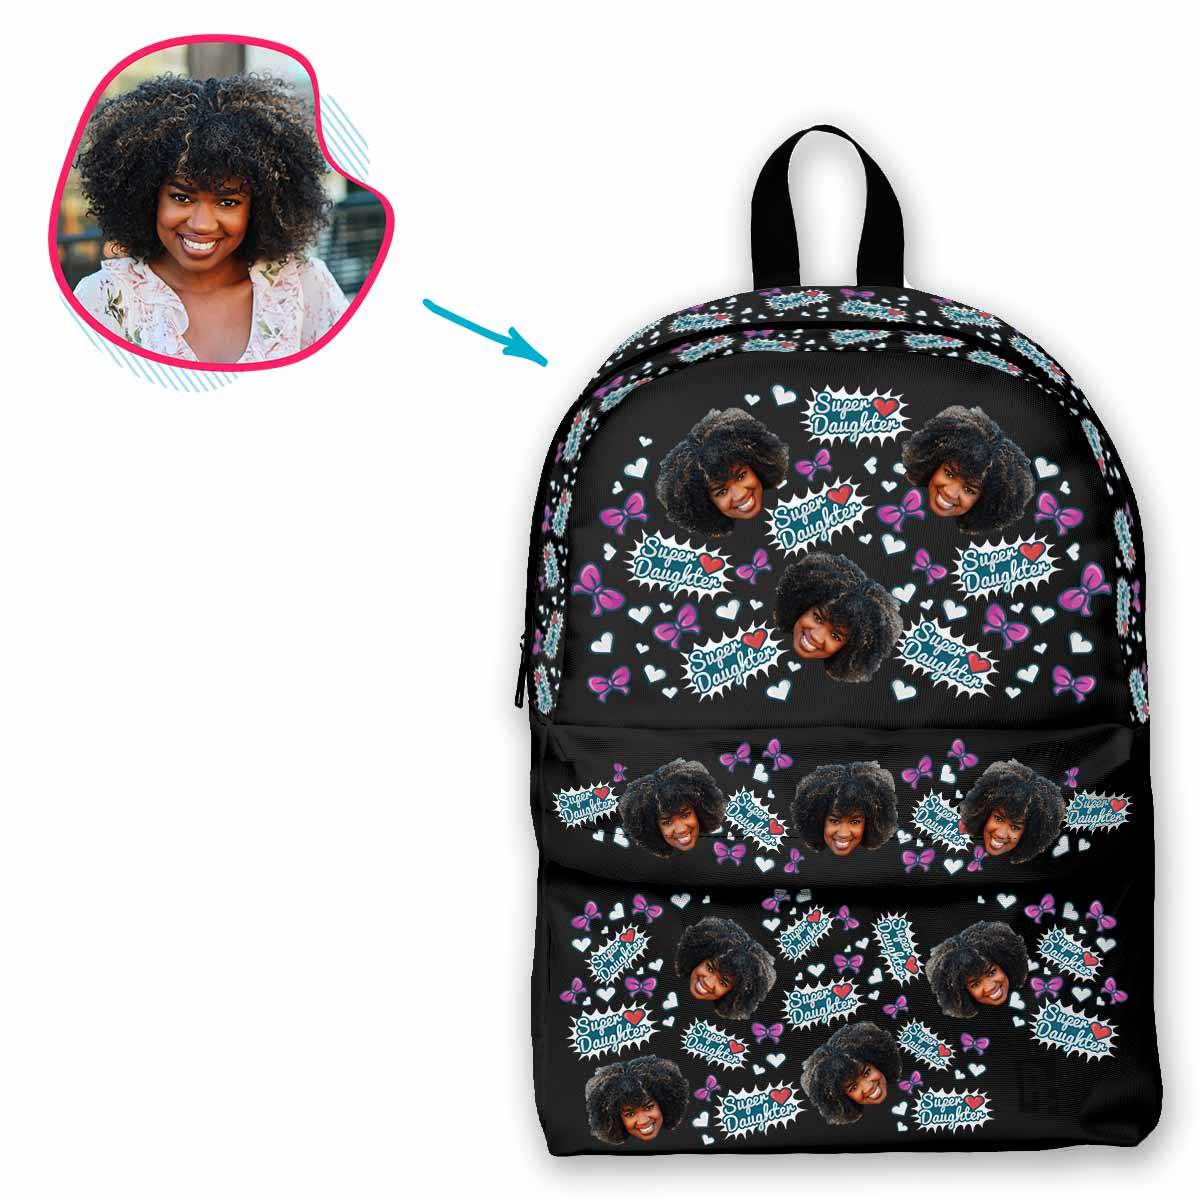 dark Super Daughter classic backpack personalized with photo of face printed on it